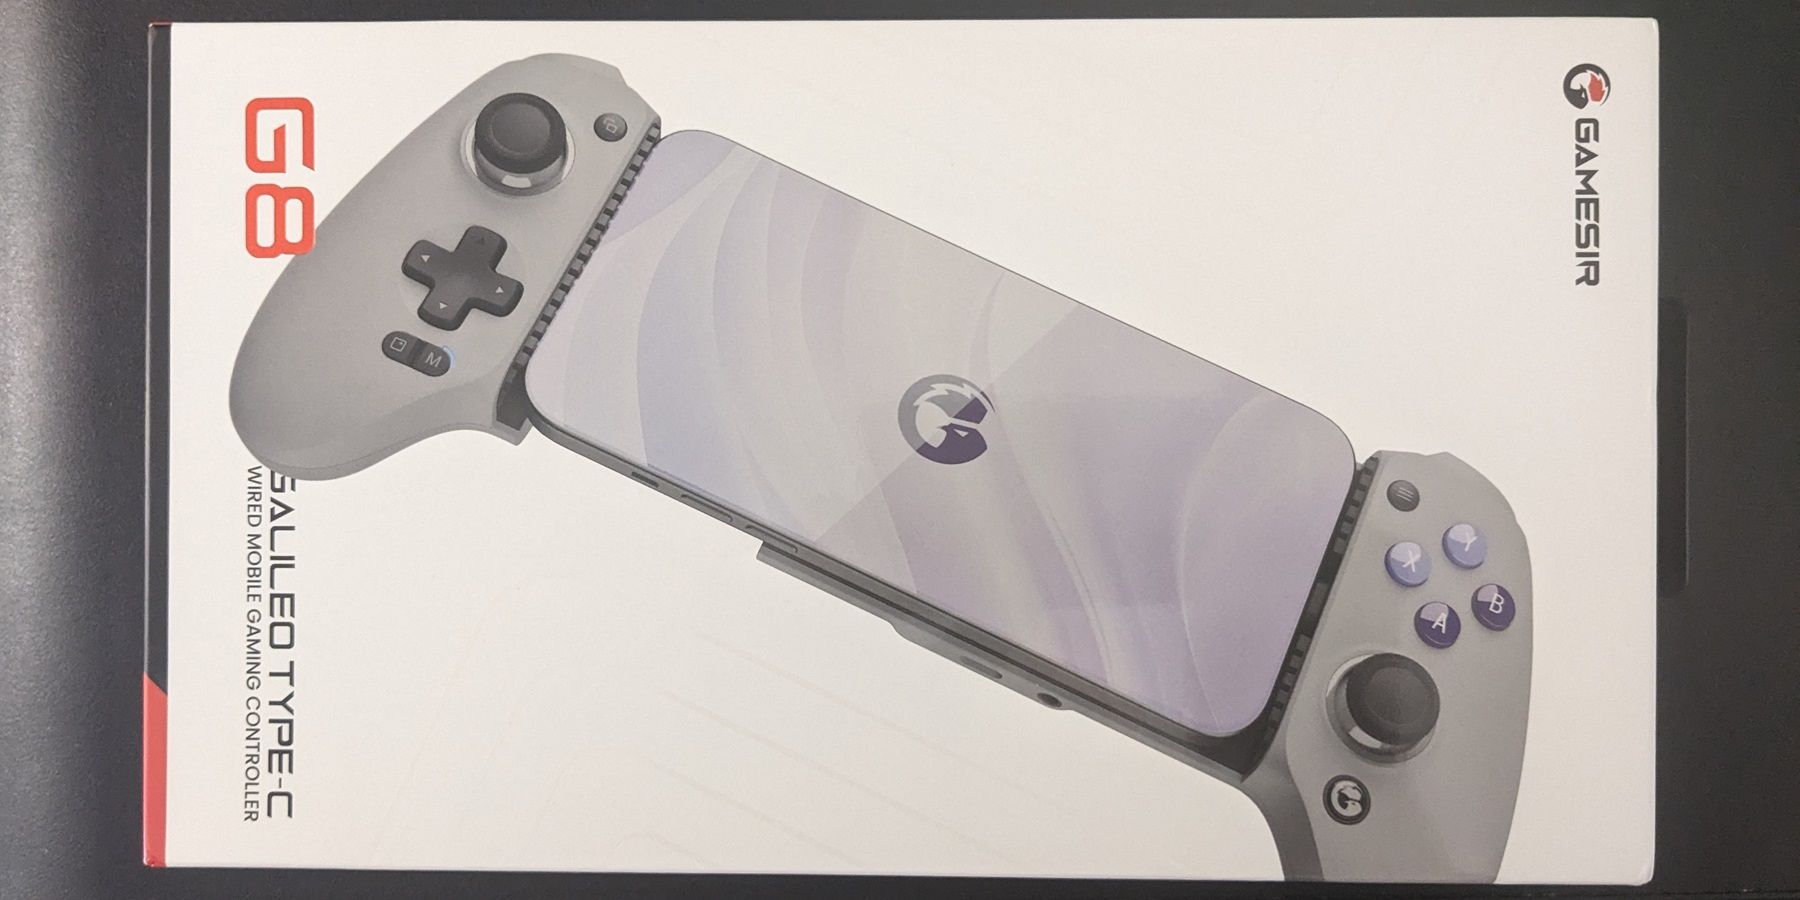 GameSir Almost Made the Best Telescopic Mobile Gaming Controller (G8  Galileo) 